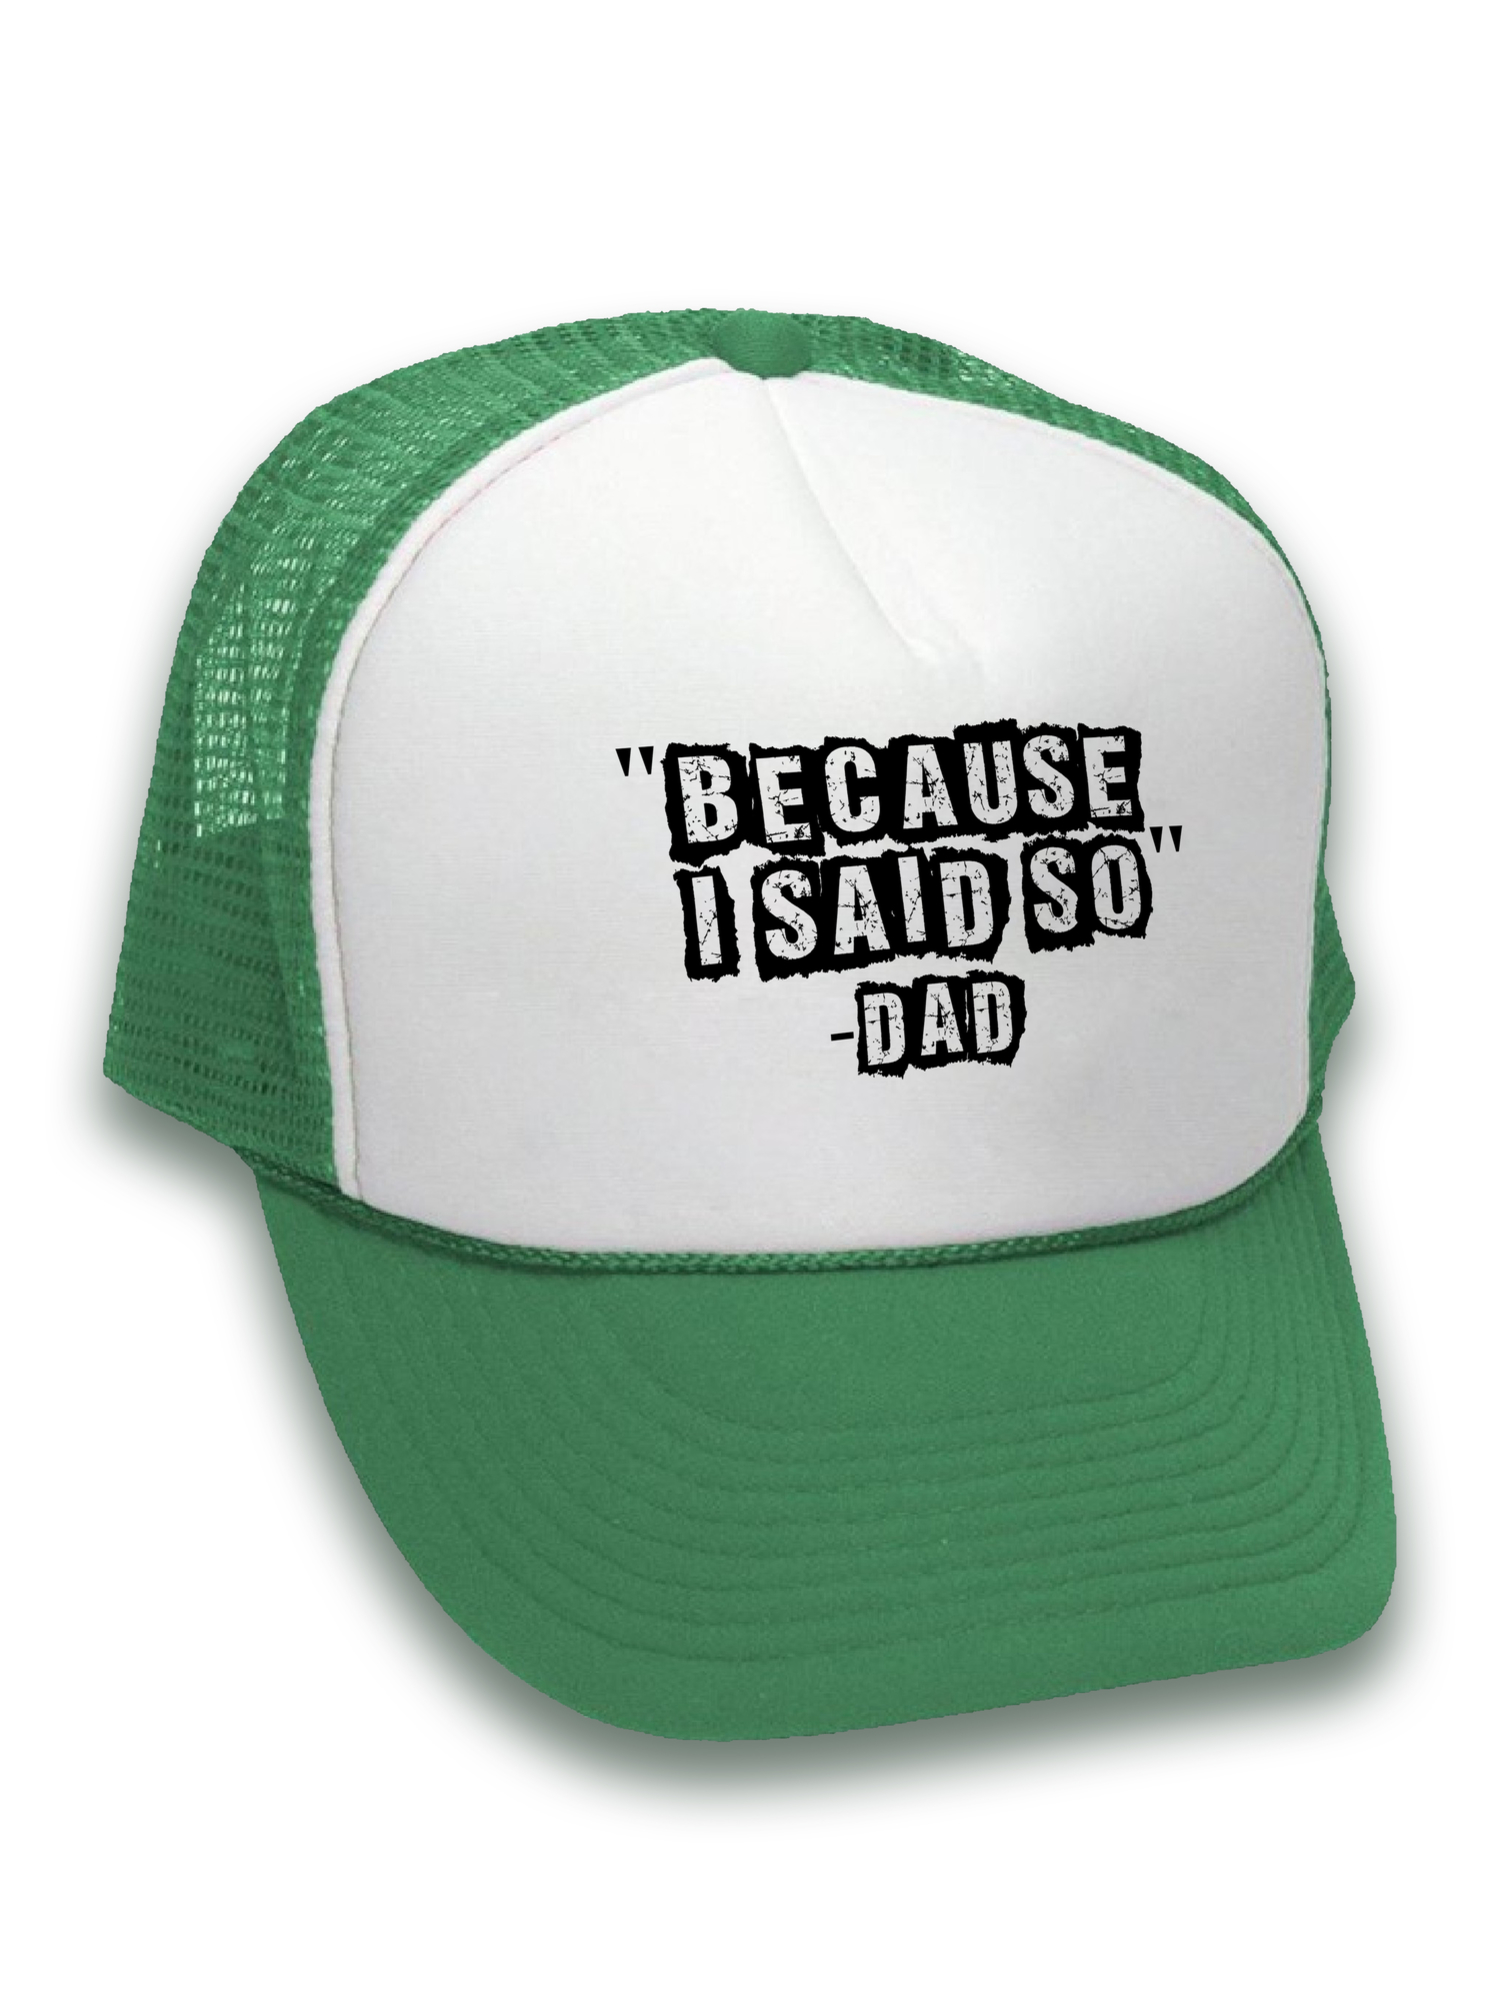 Awkward Styles Because I Said So Dad Hat Boss Dad Trucker Hat Legendary Dad Hat Funny Gifts for Father's Day Hat Accessories for Dad Father Trucker Hat Father's Day 2018 Father Son Father Daughter - image 2 of 6